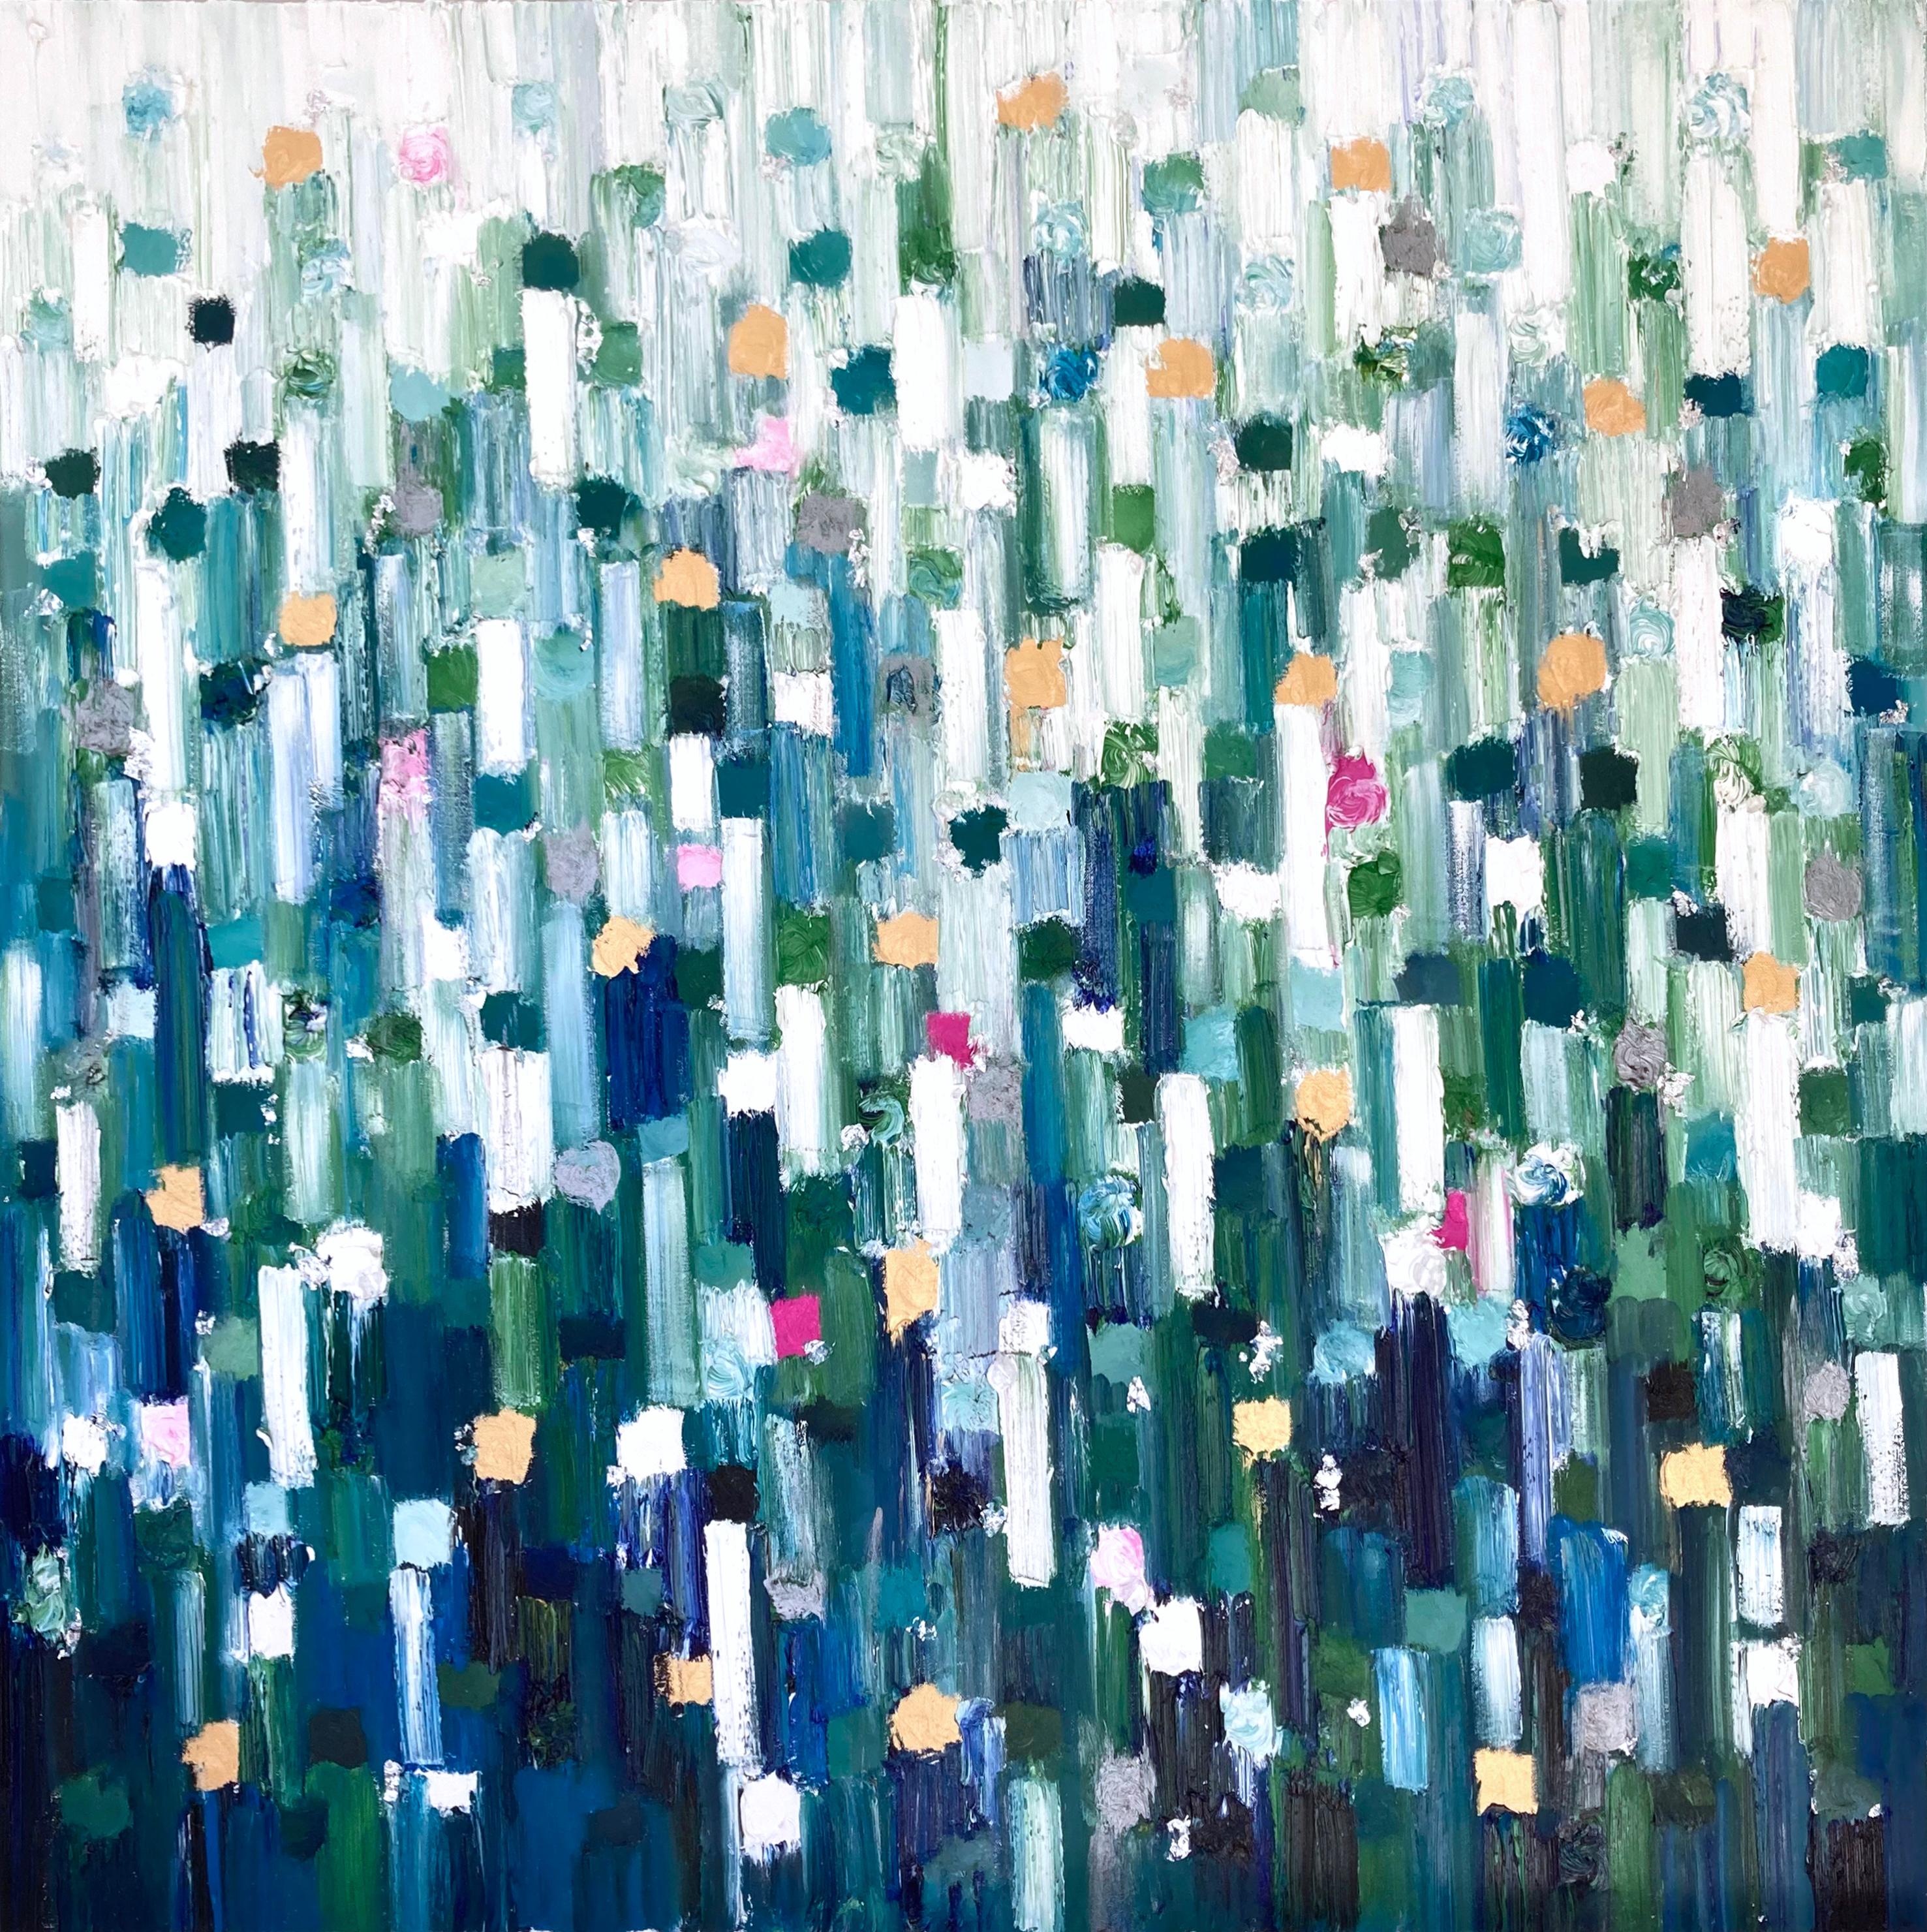 Cindy Shaoul Abstract Painting - "Dripping Dots - Singapore" Green Contemporary Oil Painting on Canvas with Gold